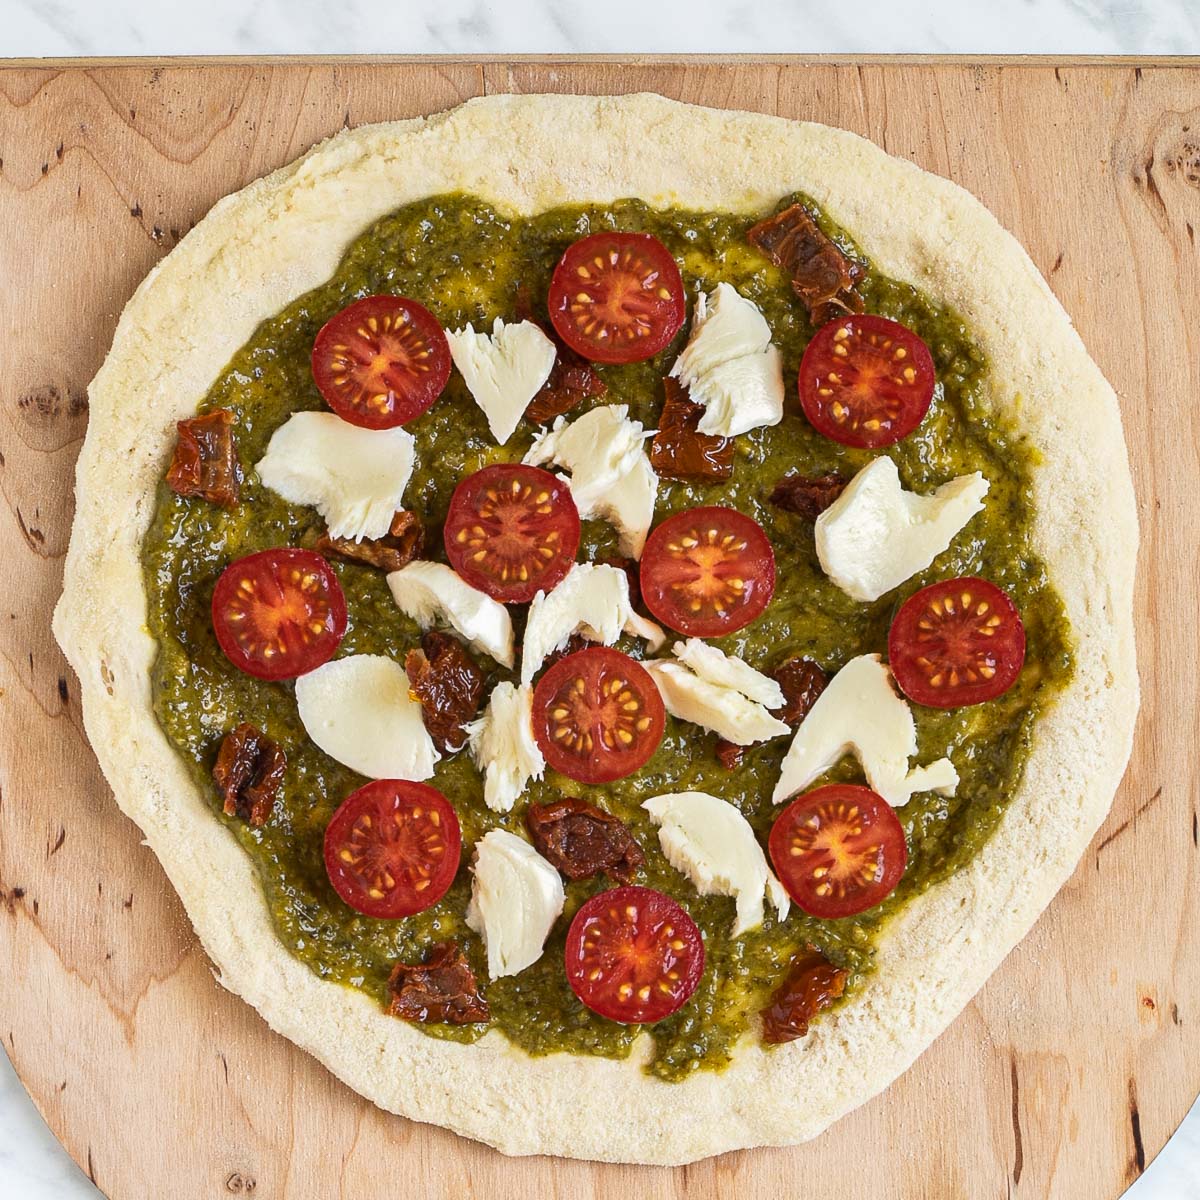 Pizza on a wooden baker's peel topped with green pesto, shredded cheese, sun-dried tomato pieces, and halved cherry tomatoes.